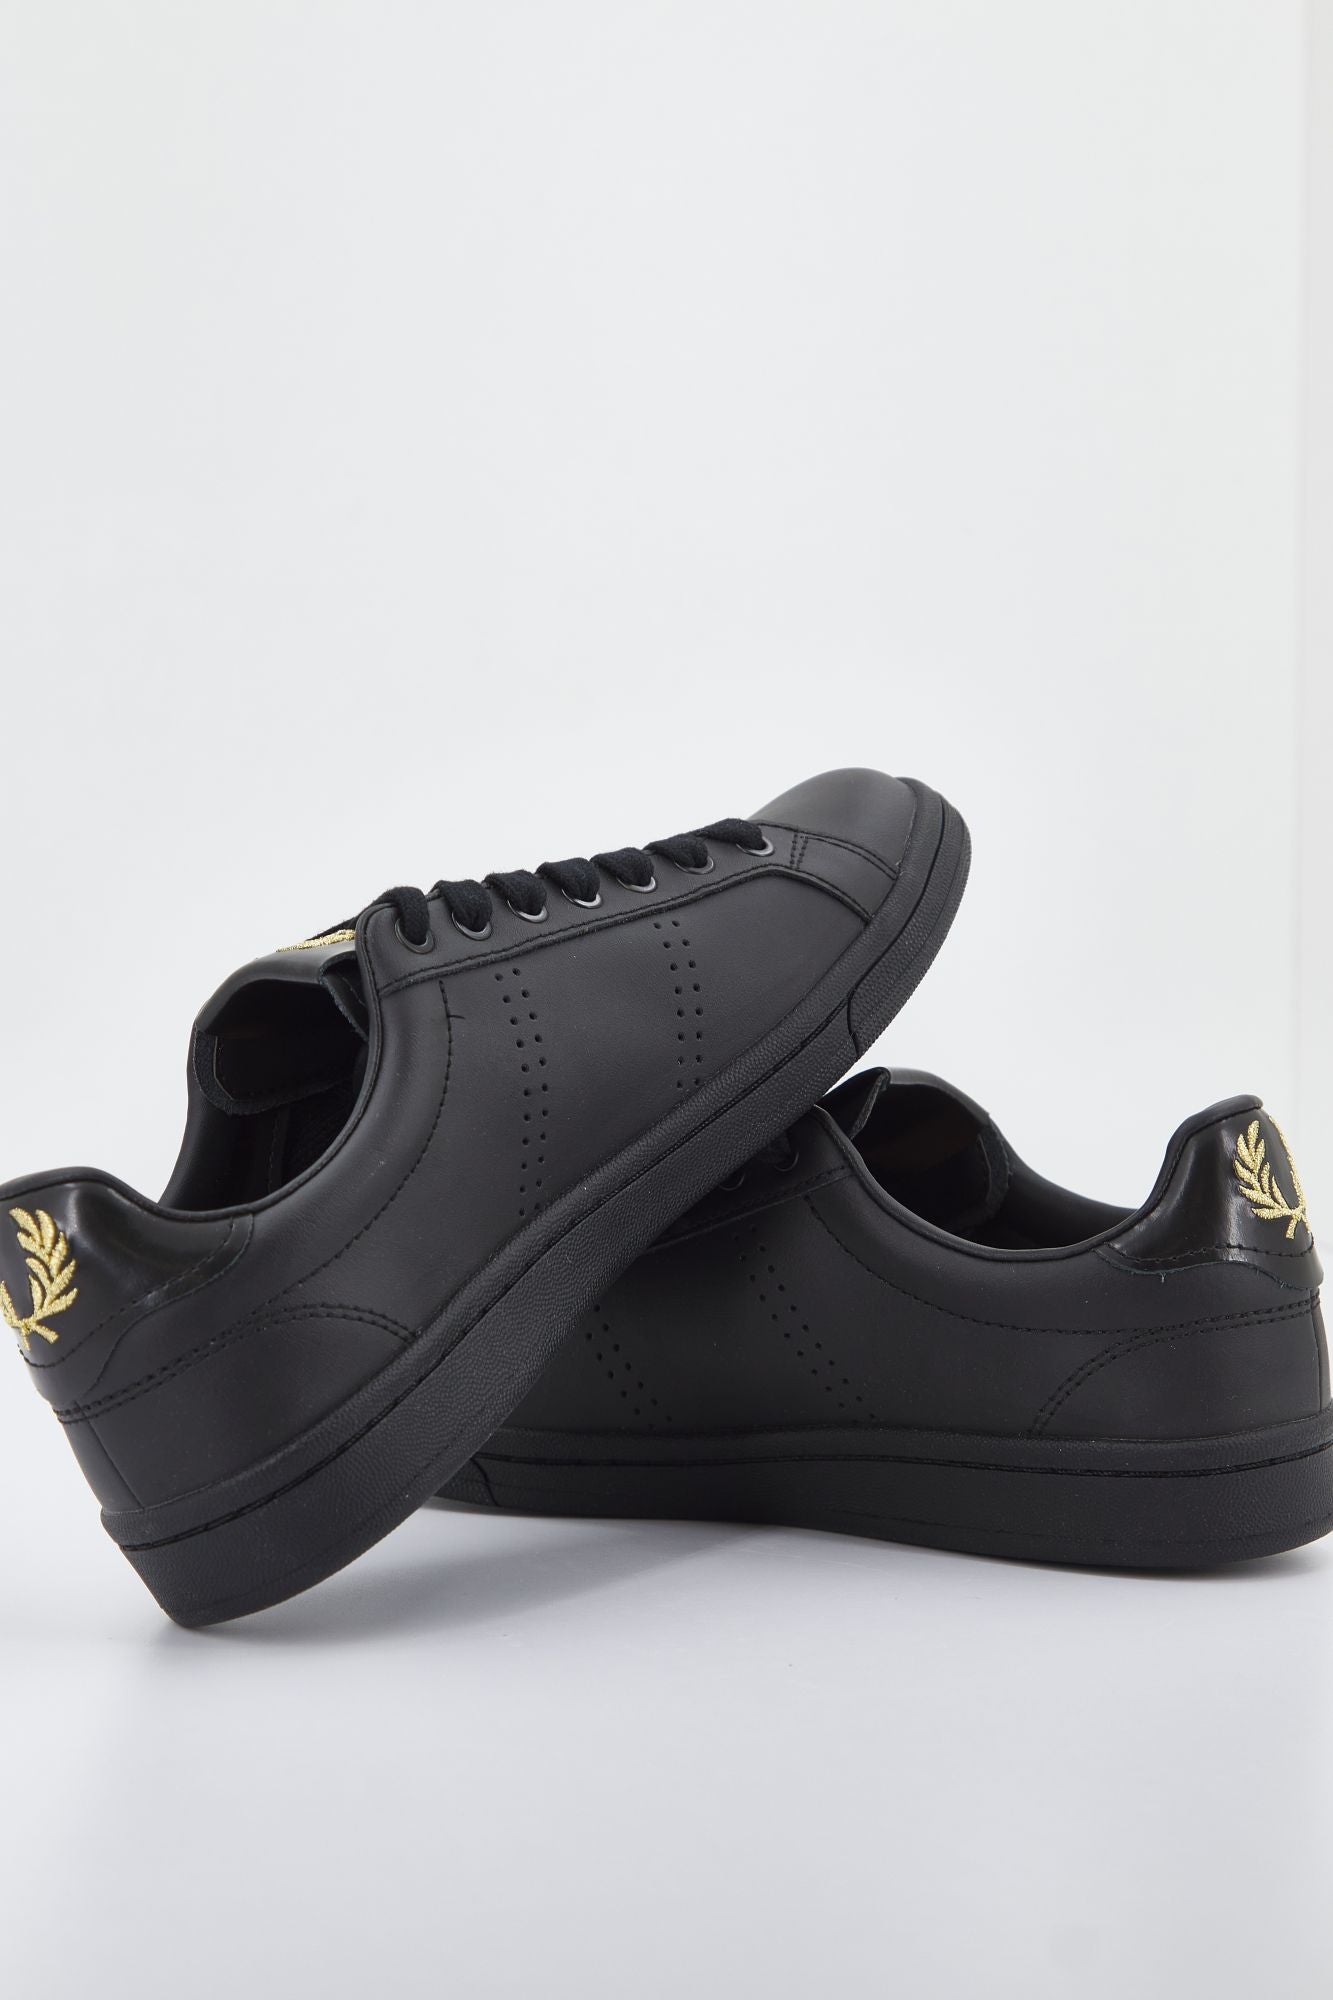 FRED PERRY  B721 LEATHER en color NEGRO (2)